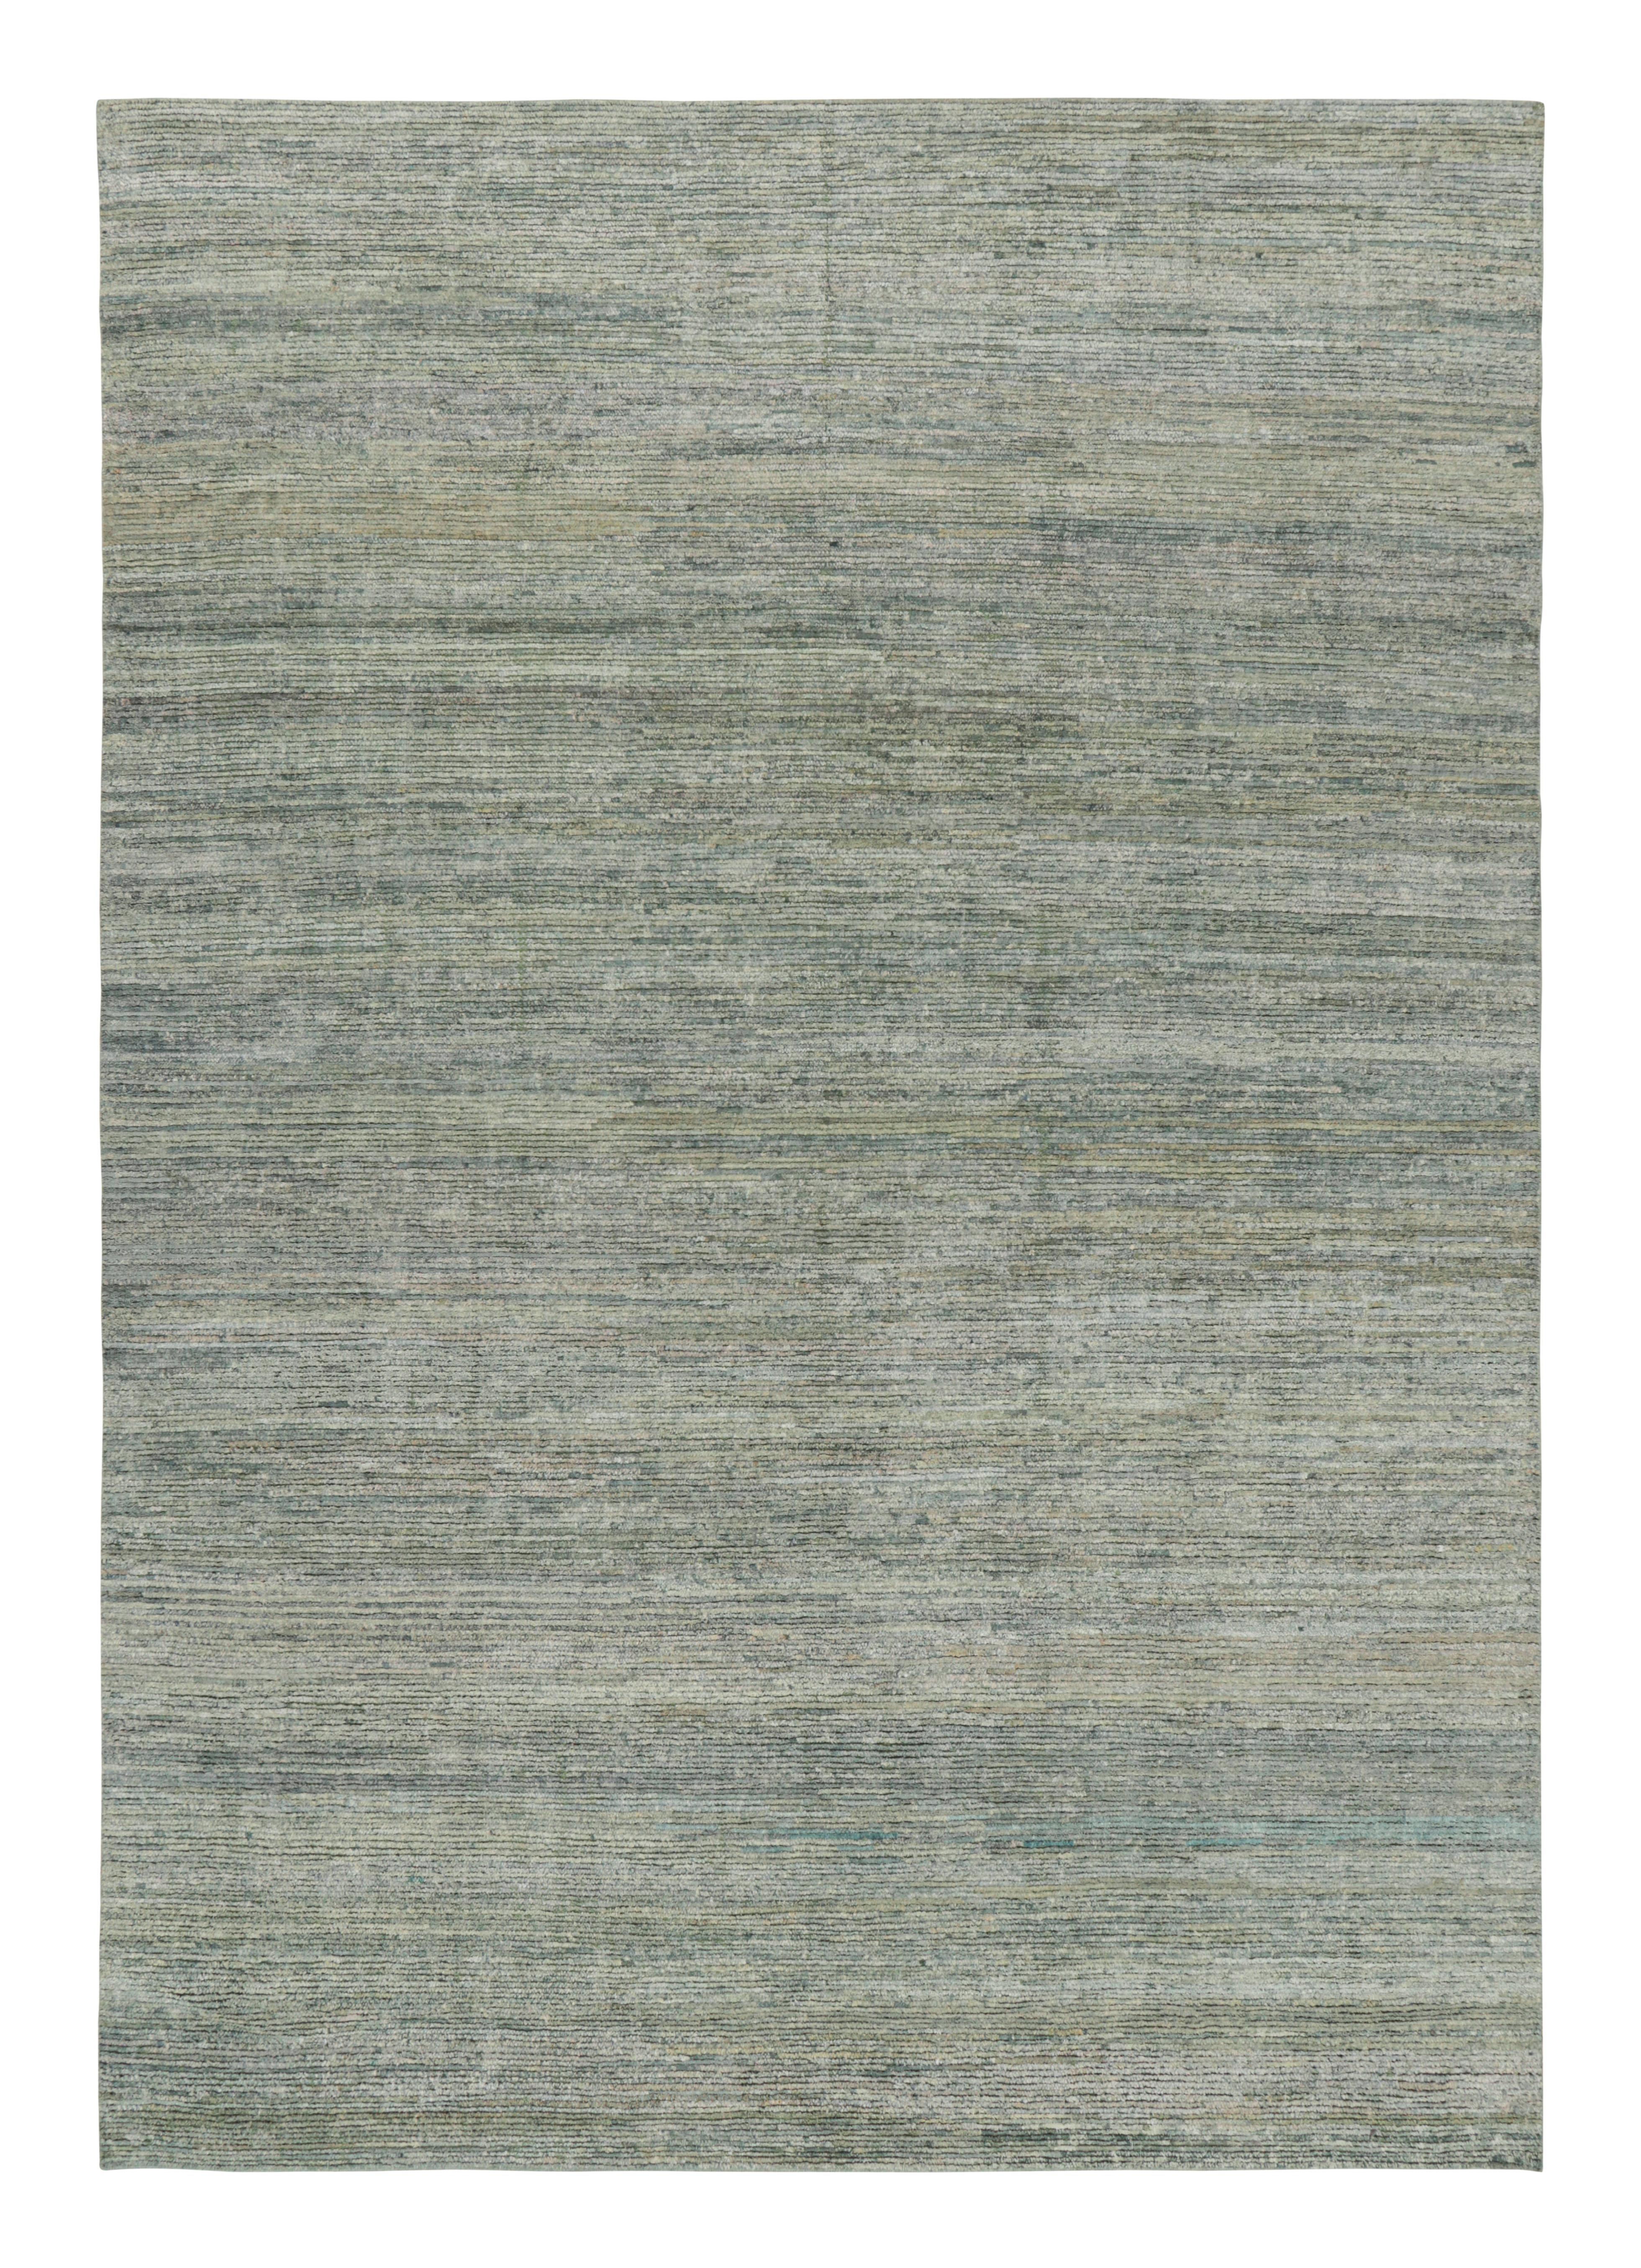 Hand-knotted in silk, this 10x14 textural rug is an exciting new addition to Rug & Kilim’s Texture of Color Collection.

On the Design: 

Our textural collection enjoys an inventive take on plain rugs, with this particular design enjoying bright